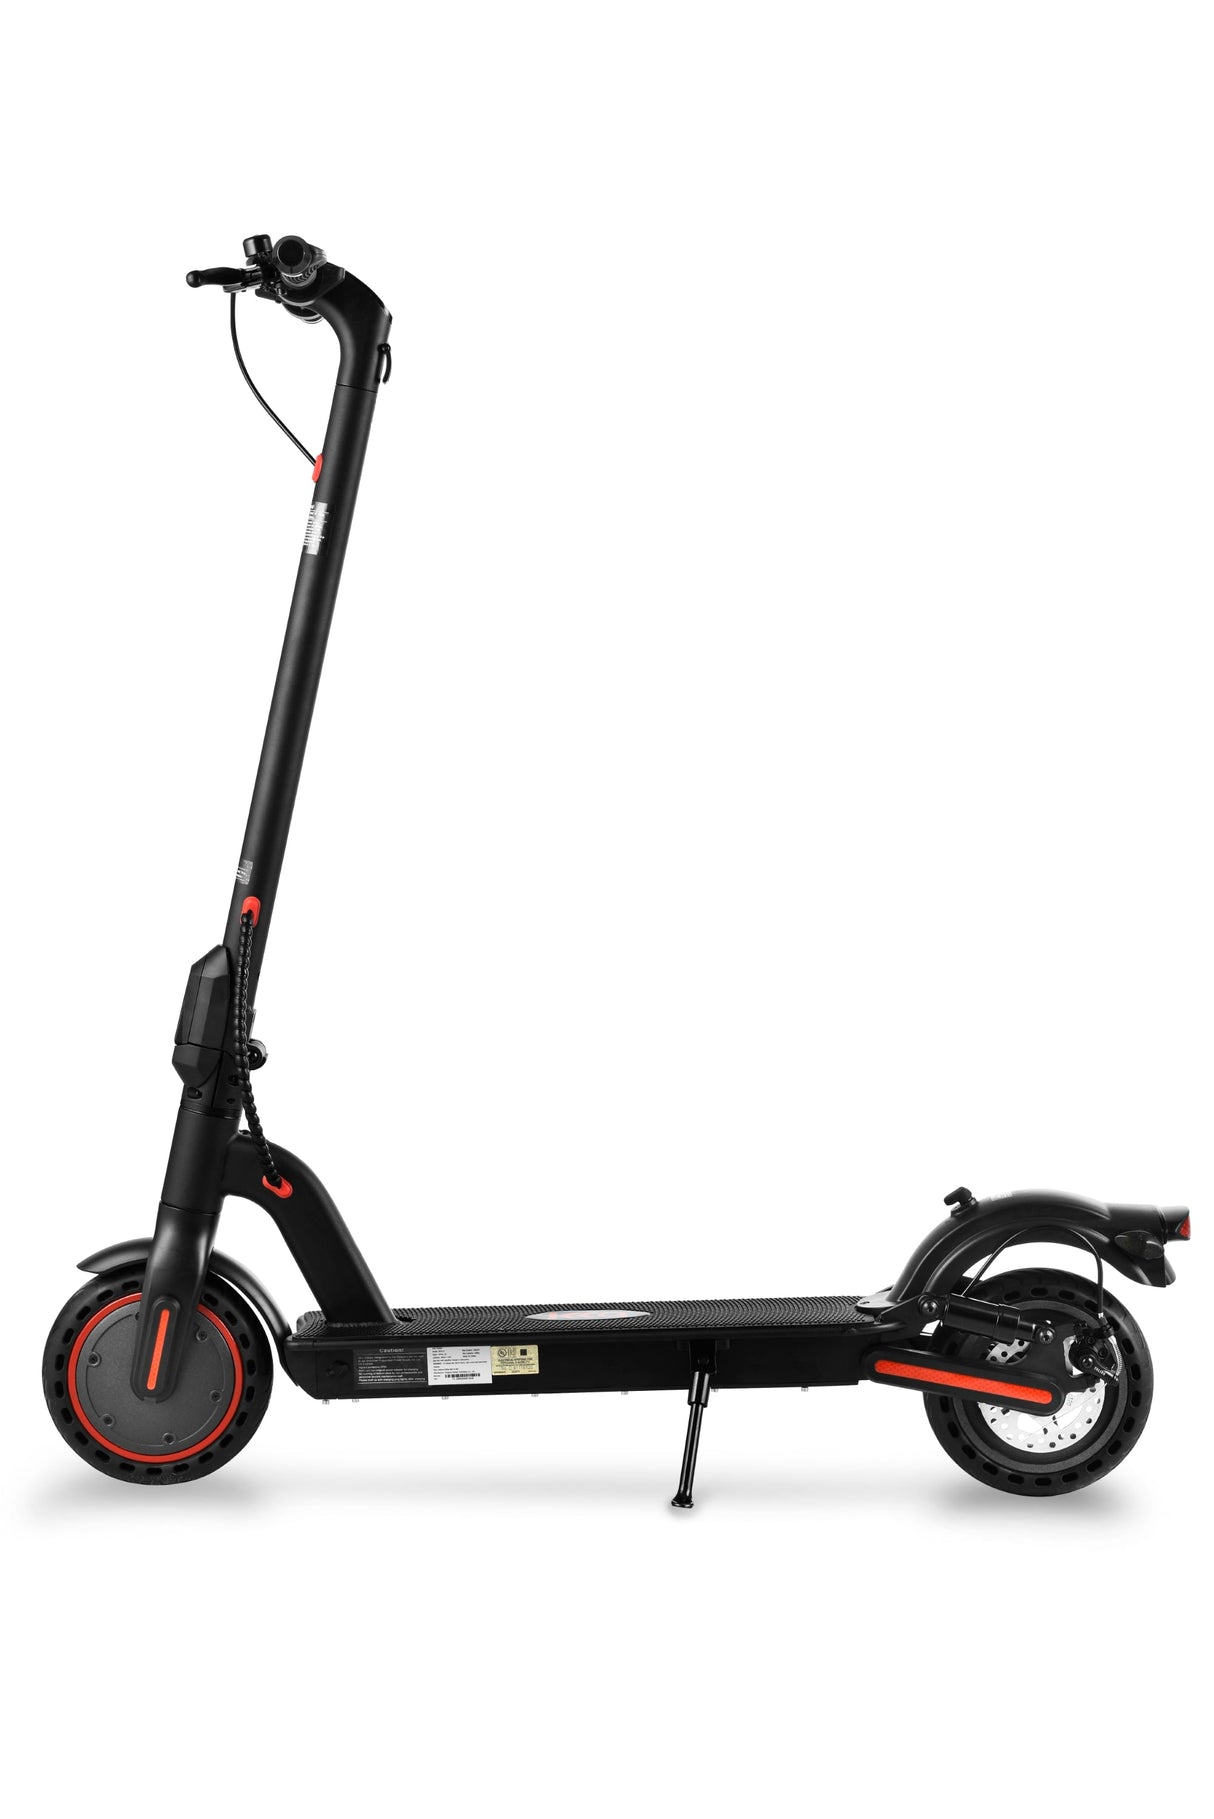 36V Freddo L2 E-Scooter 350W motor, shock absorbers, dual braking system and App, turn signal light and brake lights - DTI Direct USA